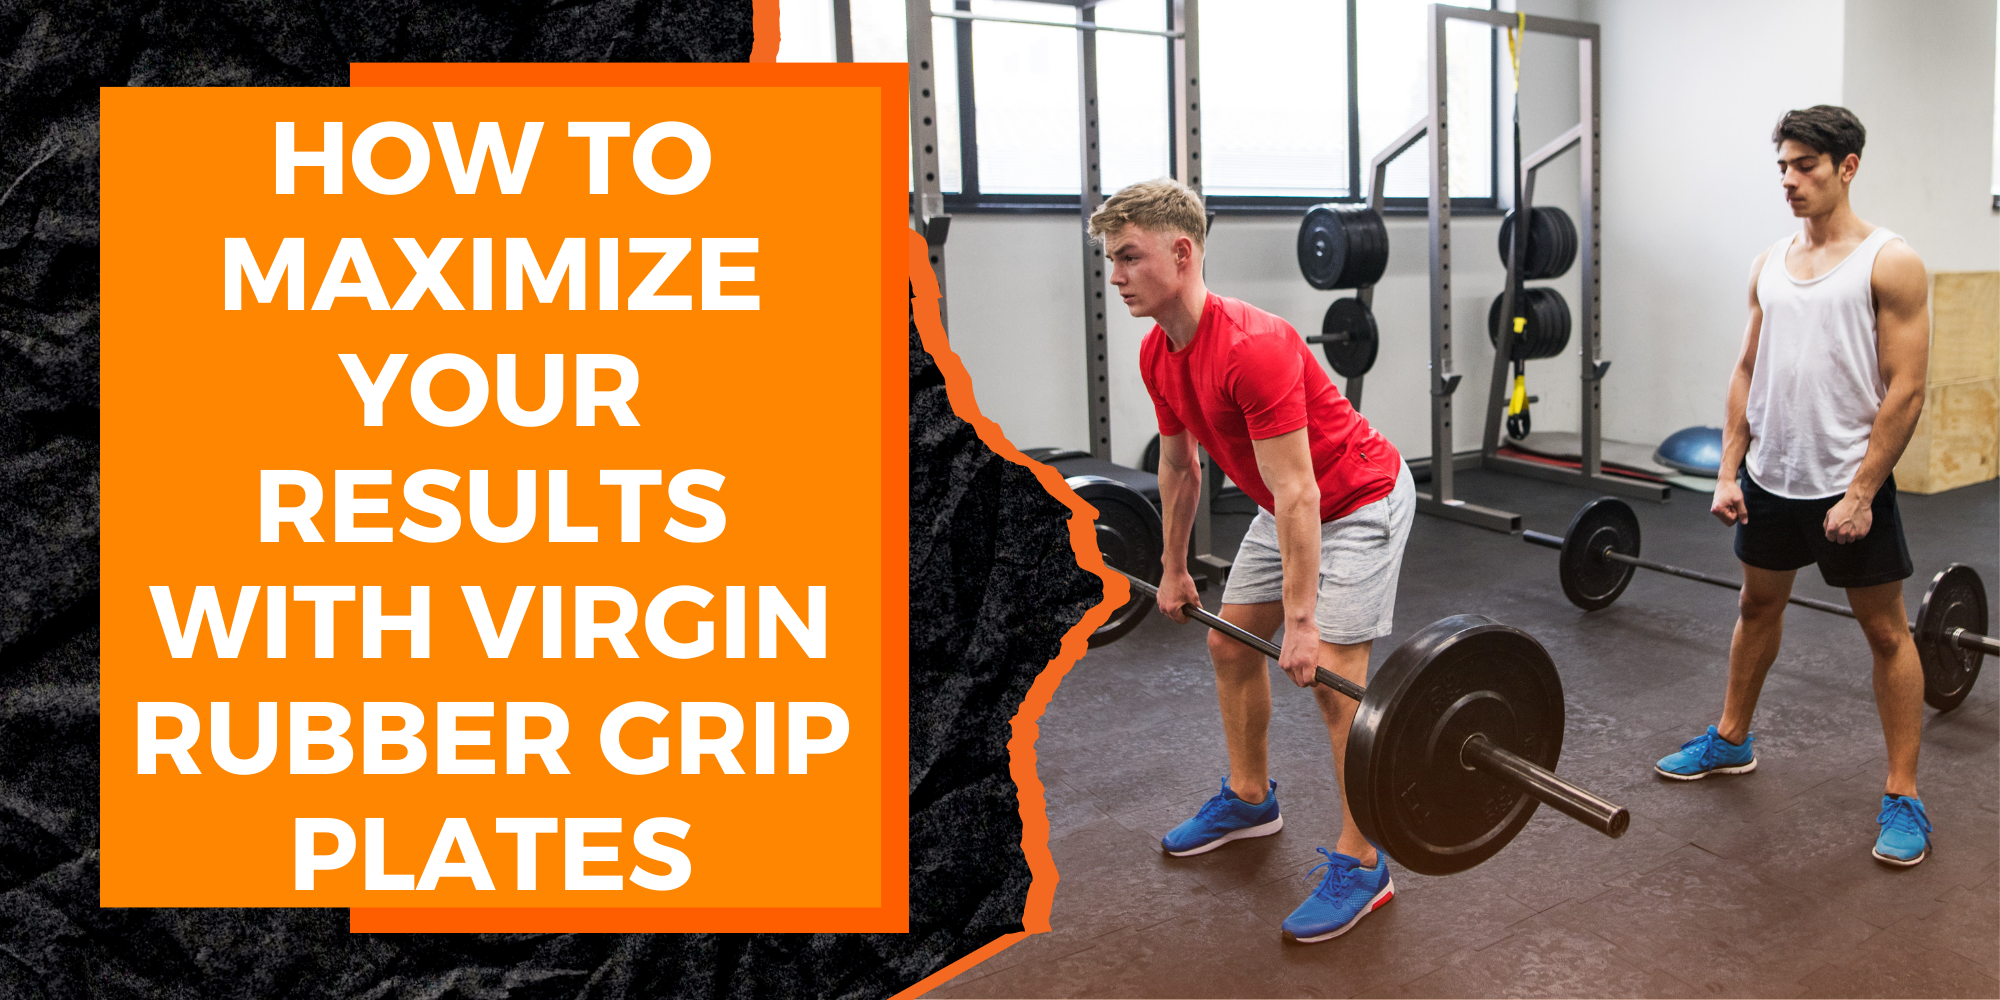 How to Maximize Your Results with Virgin Rubber Grip Plates